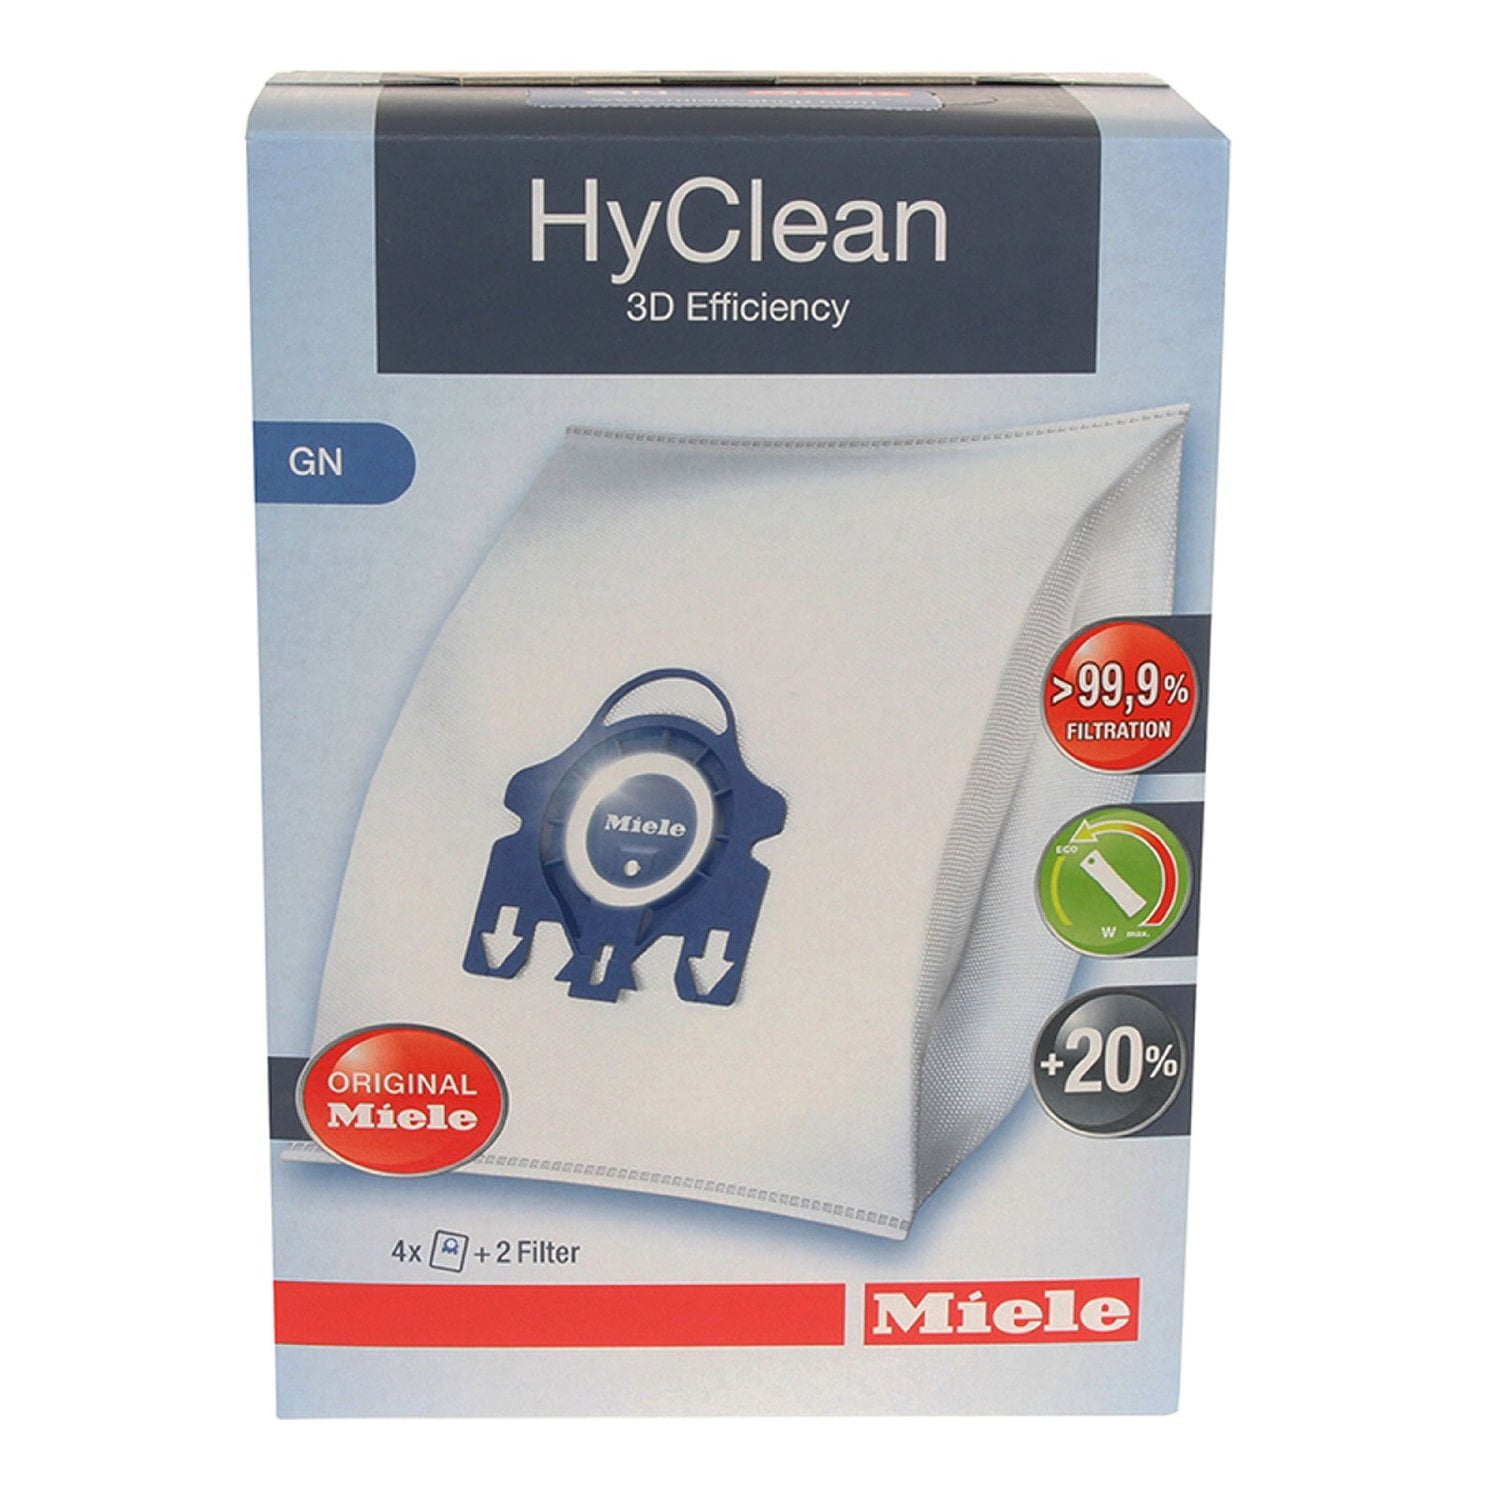 4x Genuine New 3D Efficiency HyClean Dust Bags For Miele GN Vacuum Cleaners 